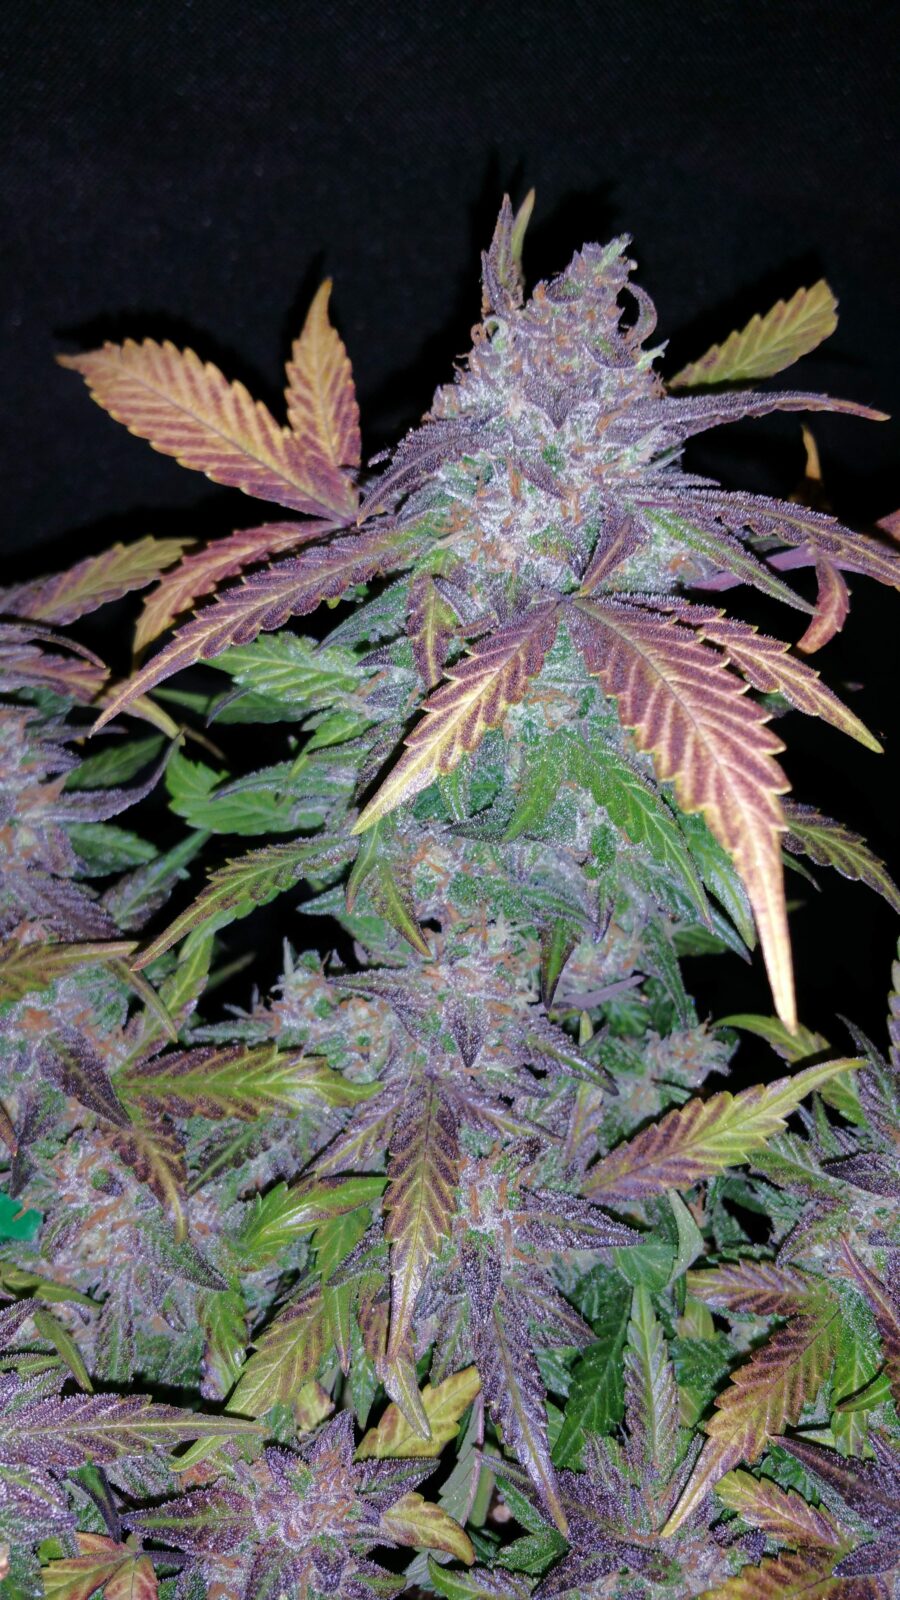 Auto Fastberry, fastberries, fastberry, fastberry 420, fastberry auto, Fastberry Auto Fast Buds, fastberry auto grow diary, fastberry auto seeds, Fastberry Auto Strain, fastberry autoflower, fastberry autoflowering, fastberry automatic, fastberry deutschland, fastberry fastbuds, fastberry seeds, fastberry strain, fastbuds fastberry